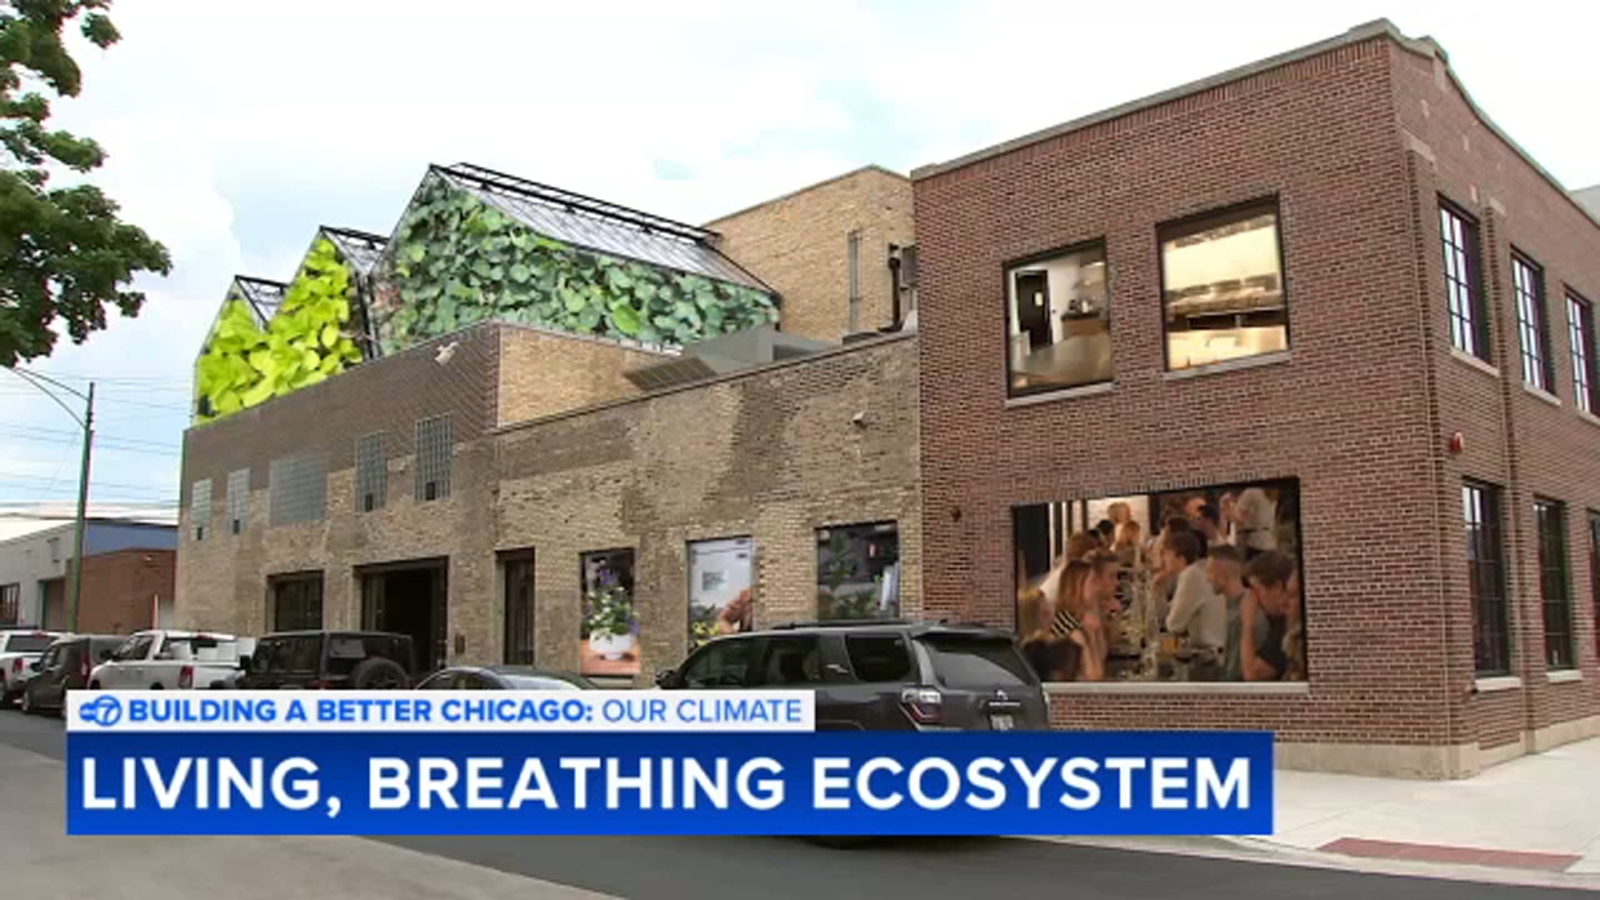 3 sustainably-obsessed Chicago businesses part of ‘living, breathing ecosystem’ in 1516 W. Carroll building in West Town [Video]